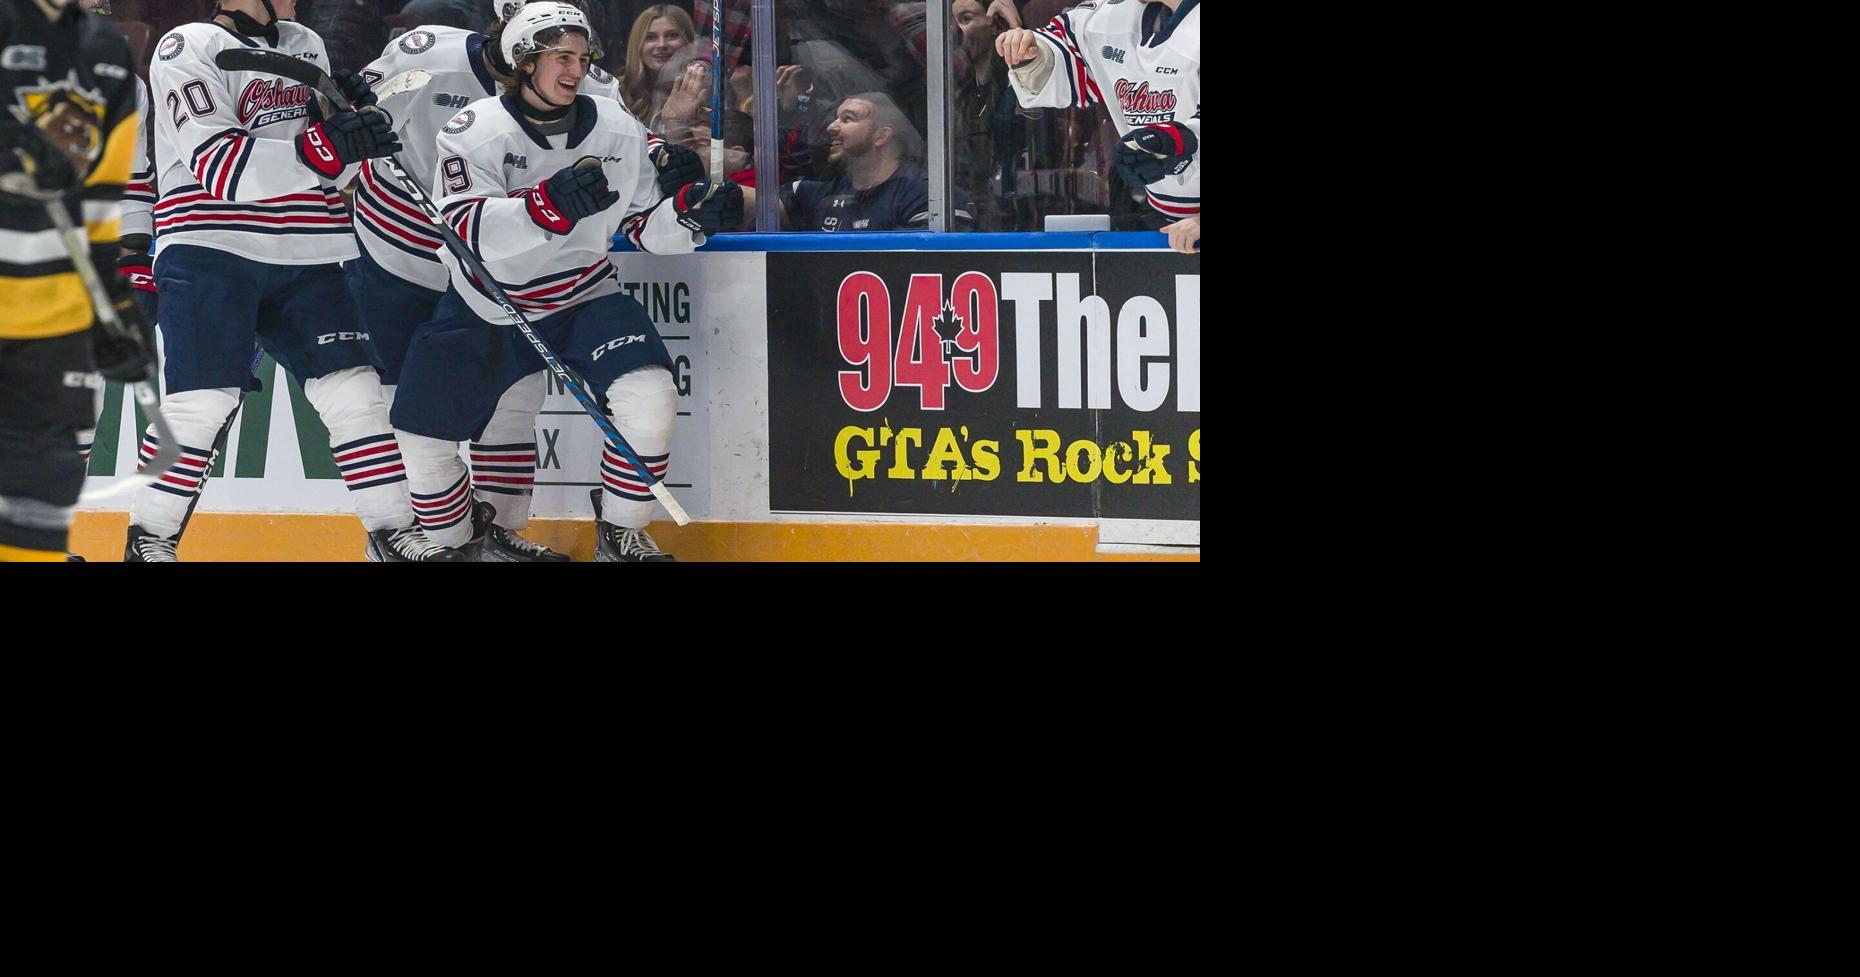 Dylan Roobroeck of the Oshawa Generals skates against the